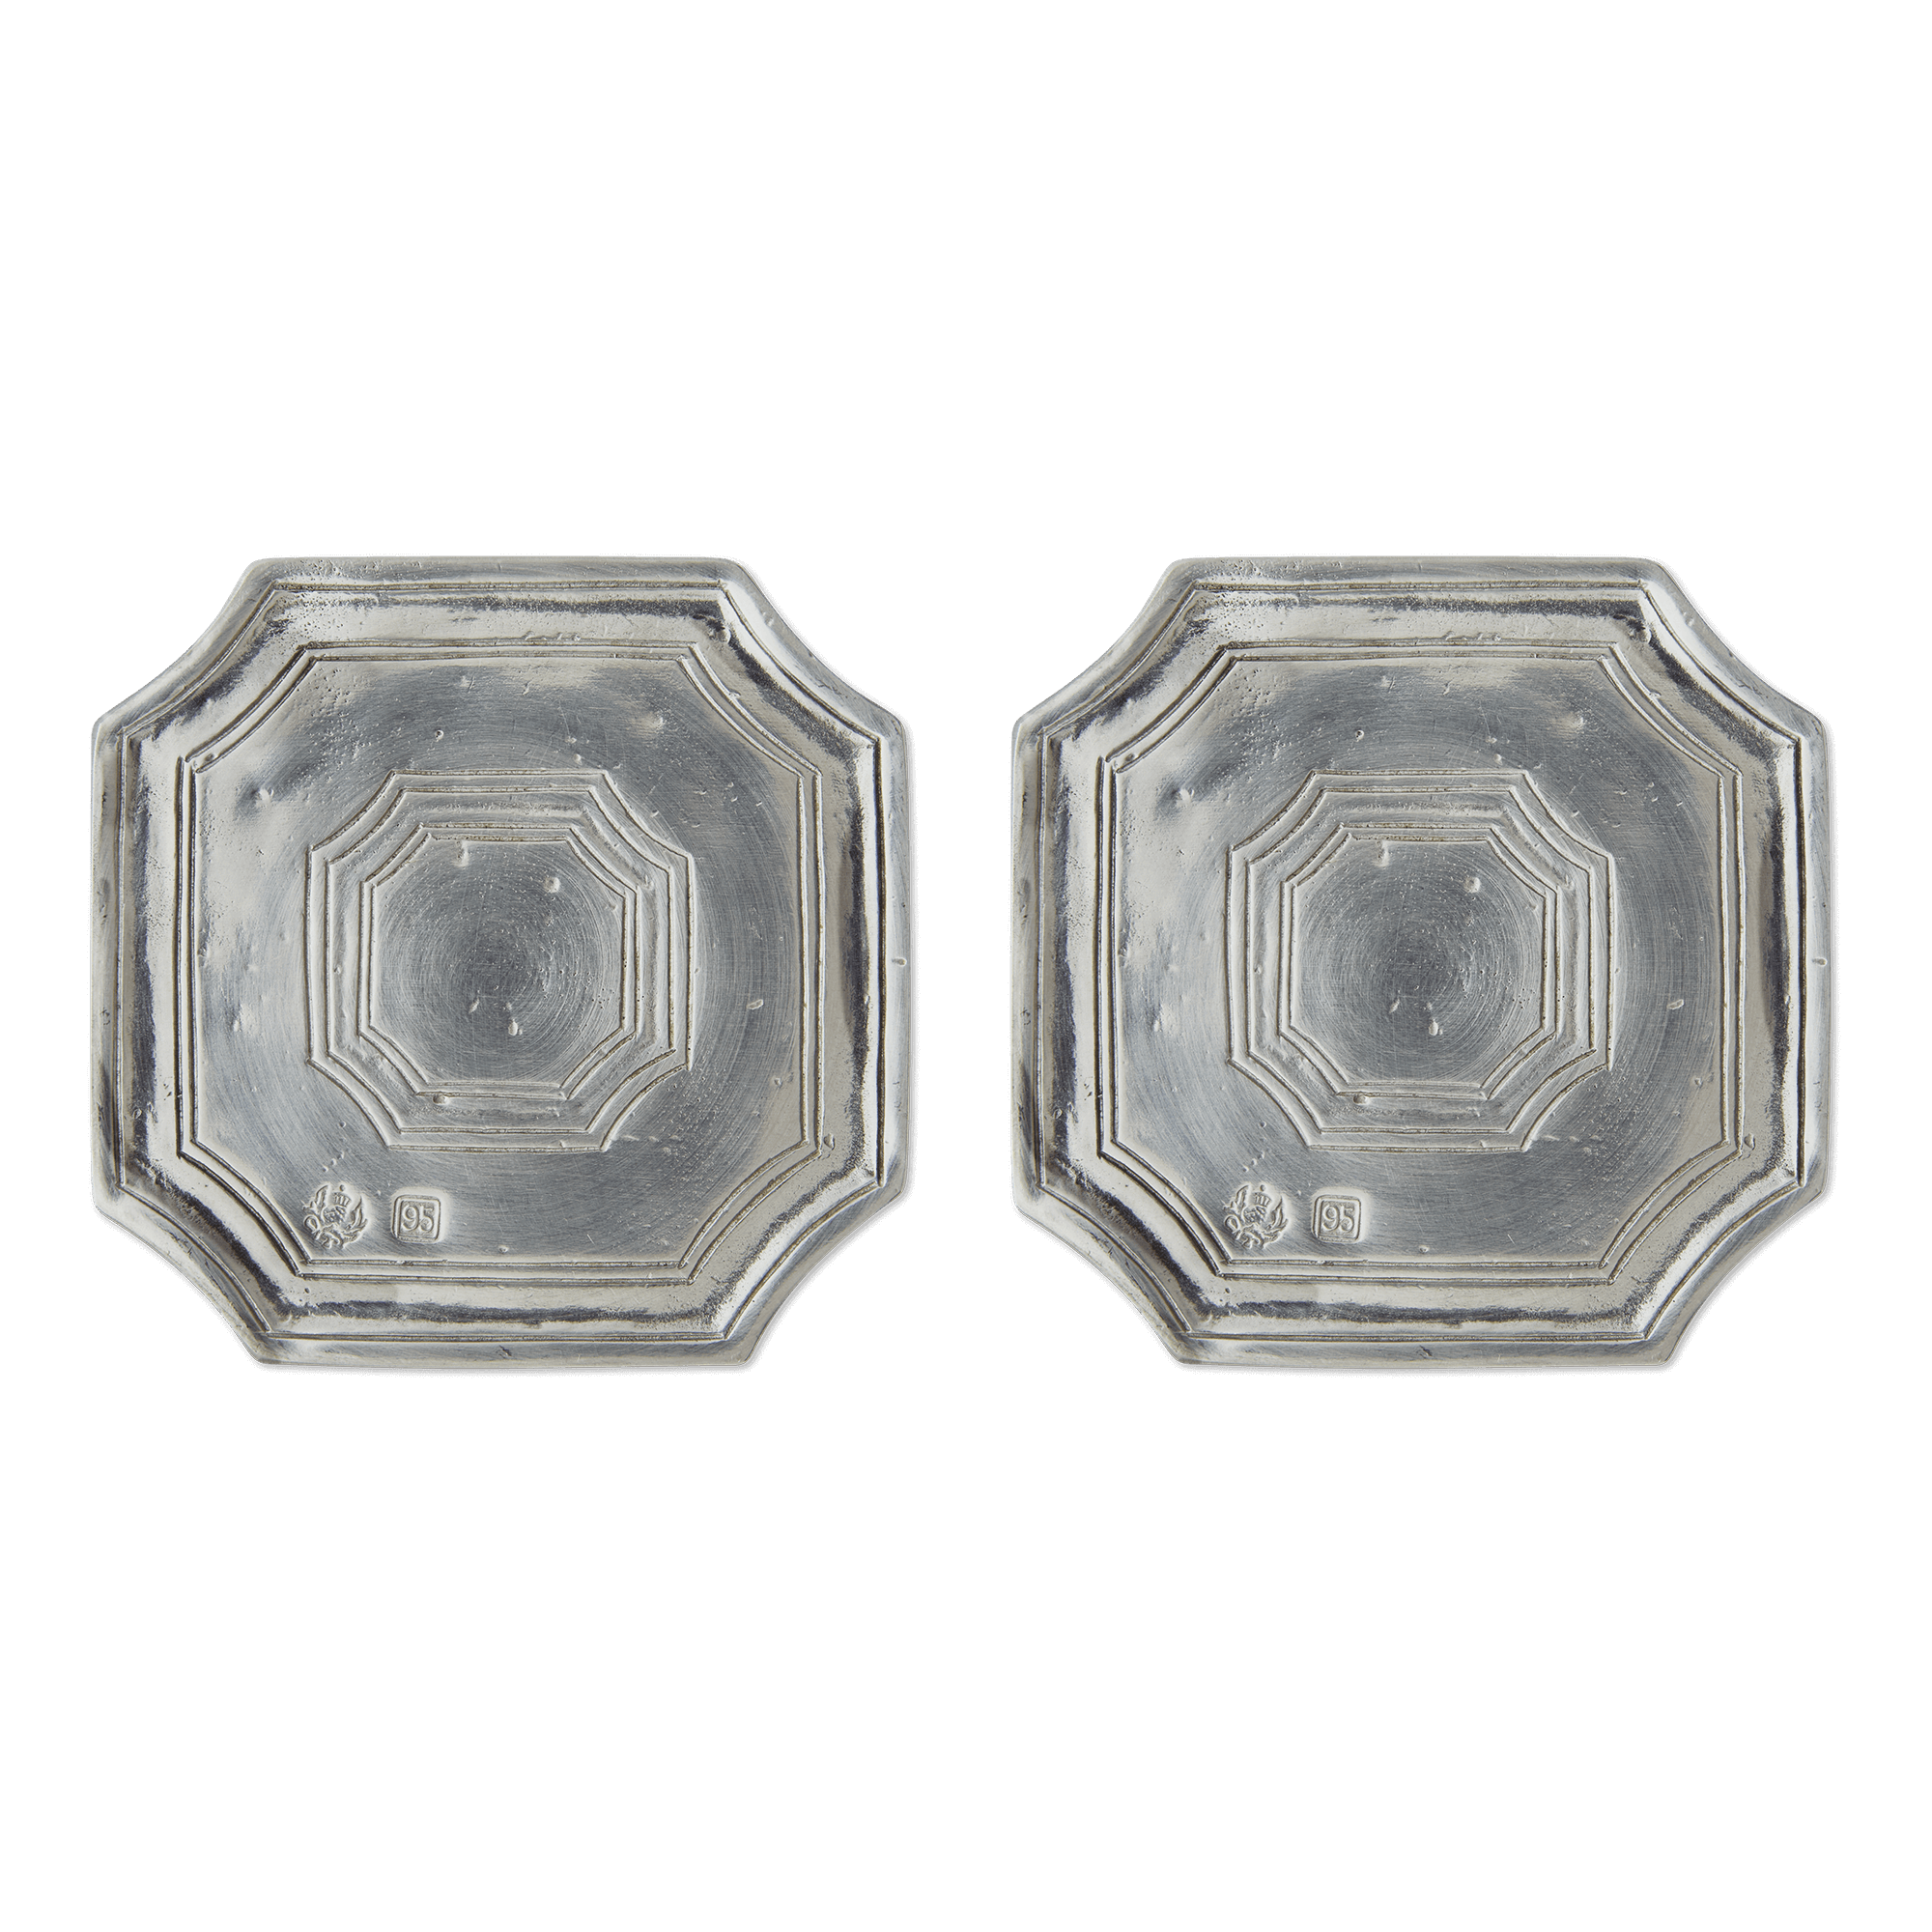 Match Pewter Square Coasters, Pair